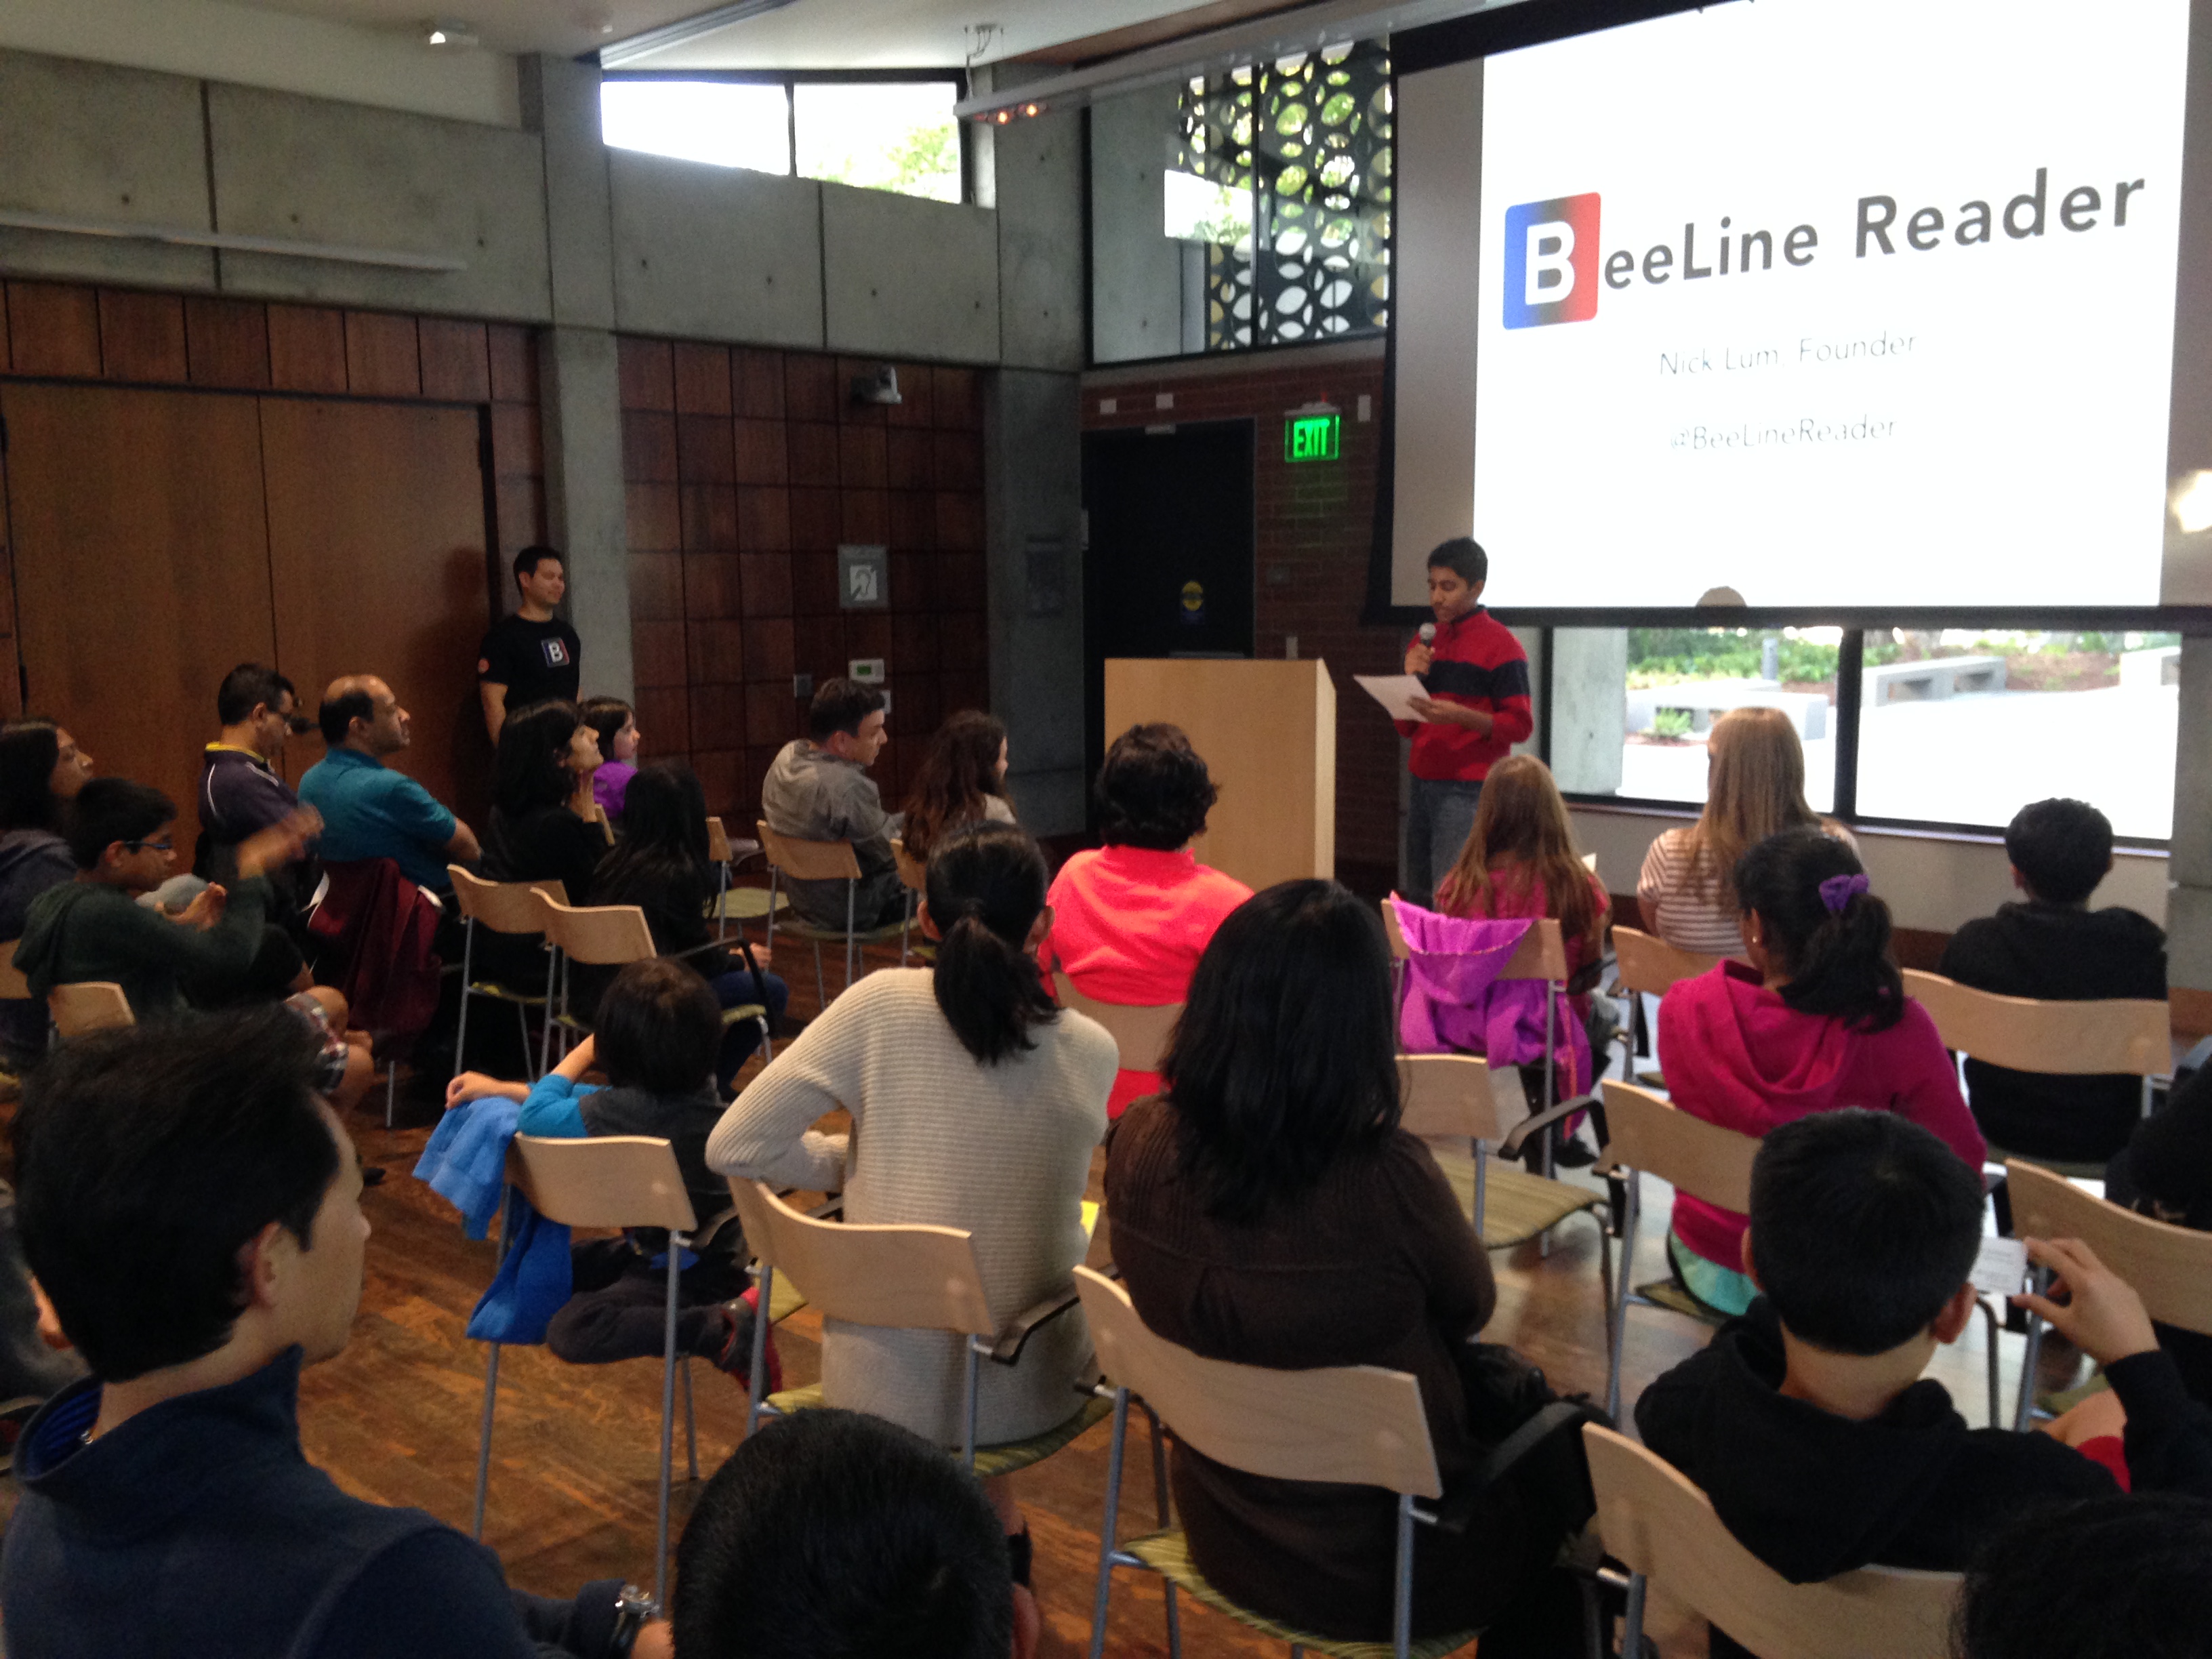 AlligatorZone, where kids meet cool startups and get inspired about entrepreneurship and innovation featured Nick Lum, founder, BeeLine Reader in Palo Alto, California, on May 22, 2015.